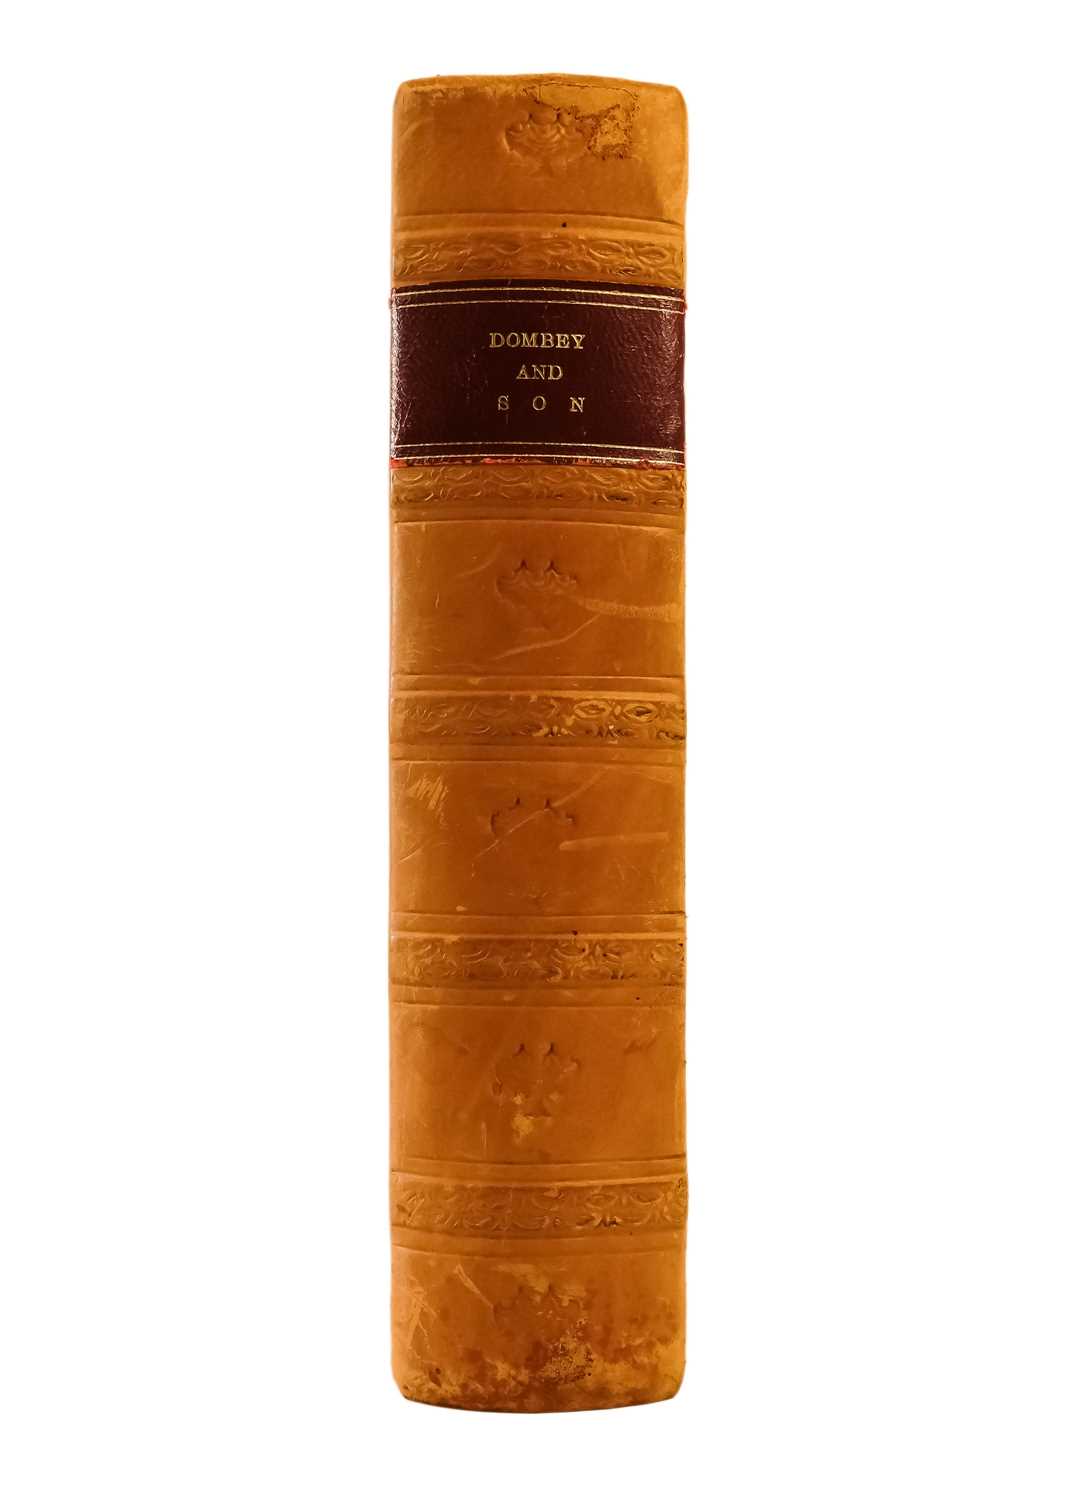 DICKENS, Charles 'Dombey and Son,' - Image 2 of 10